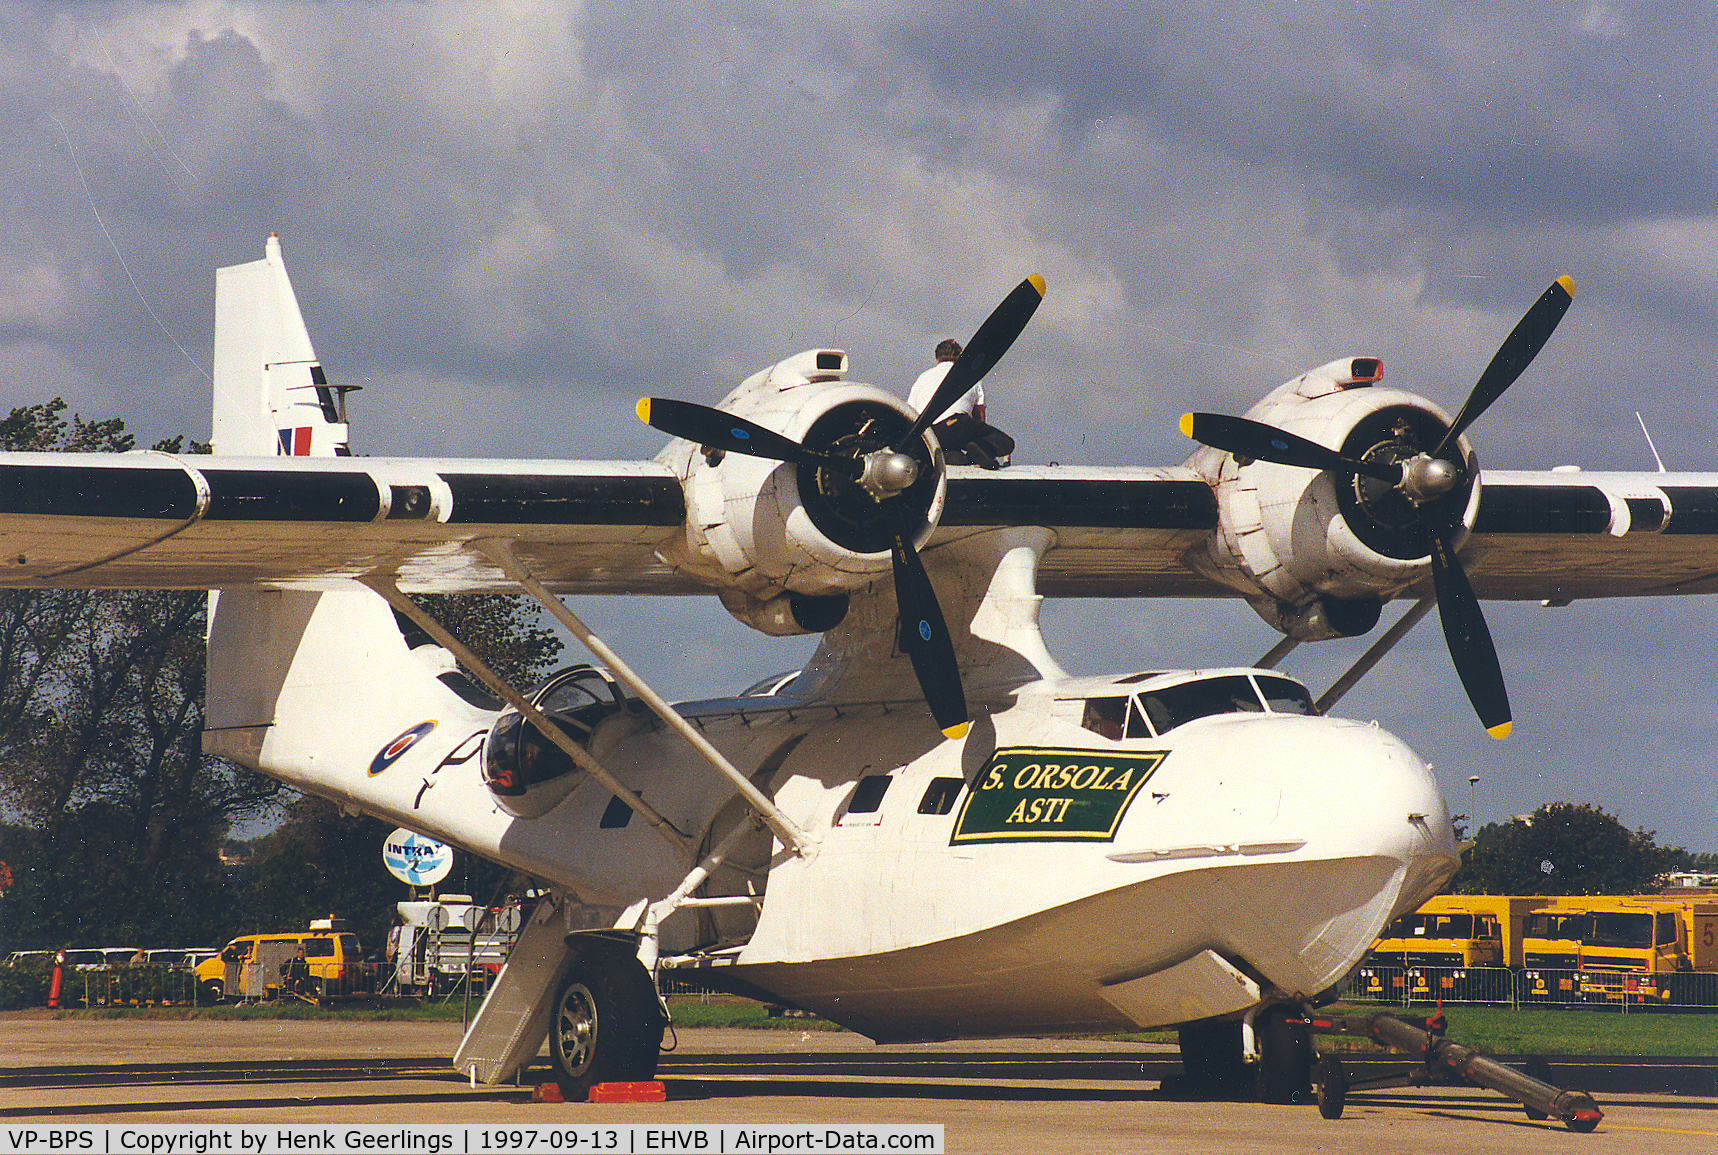 VP-BPS, 1944 Consolidated PBY-5A Catalina C/N 1997, 80 years Dutch Navy Air Arm ( MLD) E